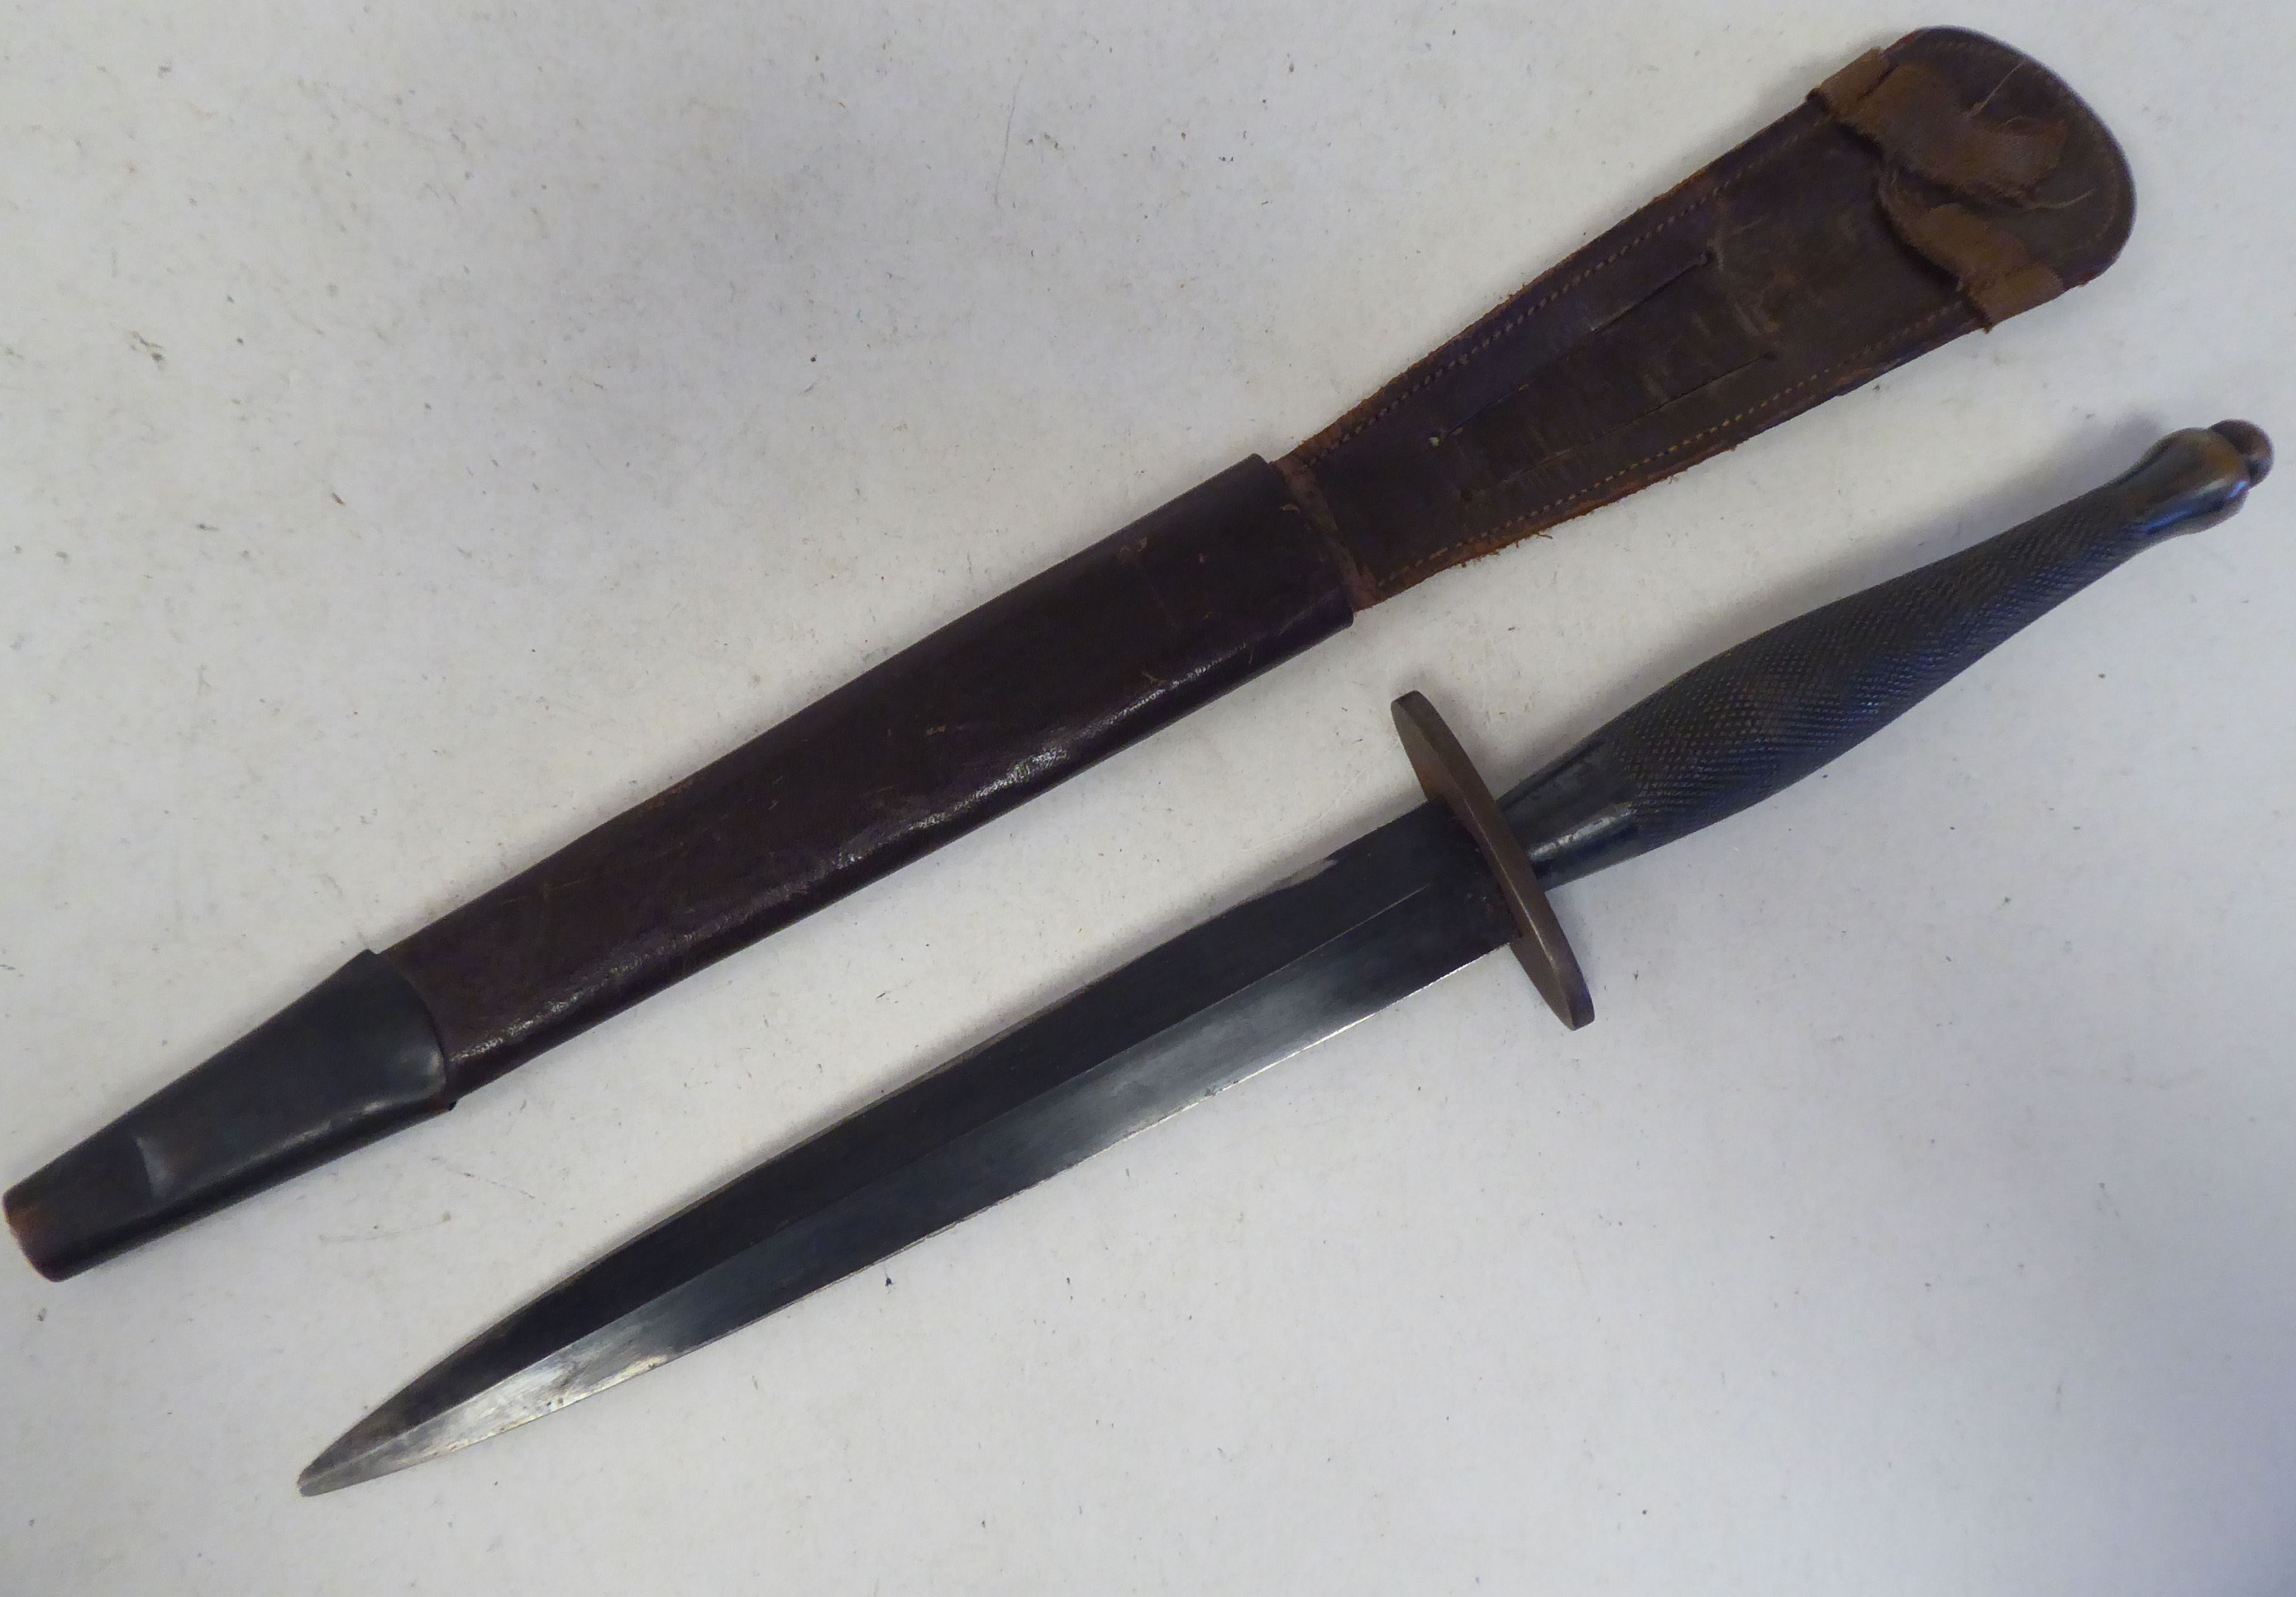 A World War II commando knife with a textured, elliptical handle, the blade 6.5"L in a moulded and